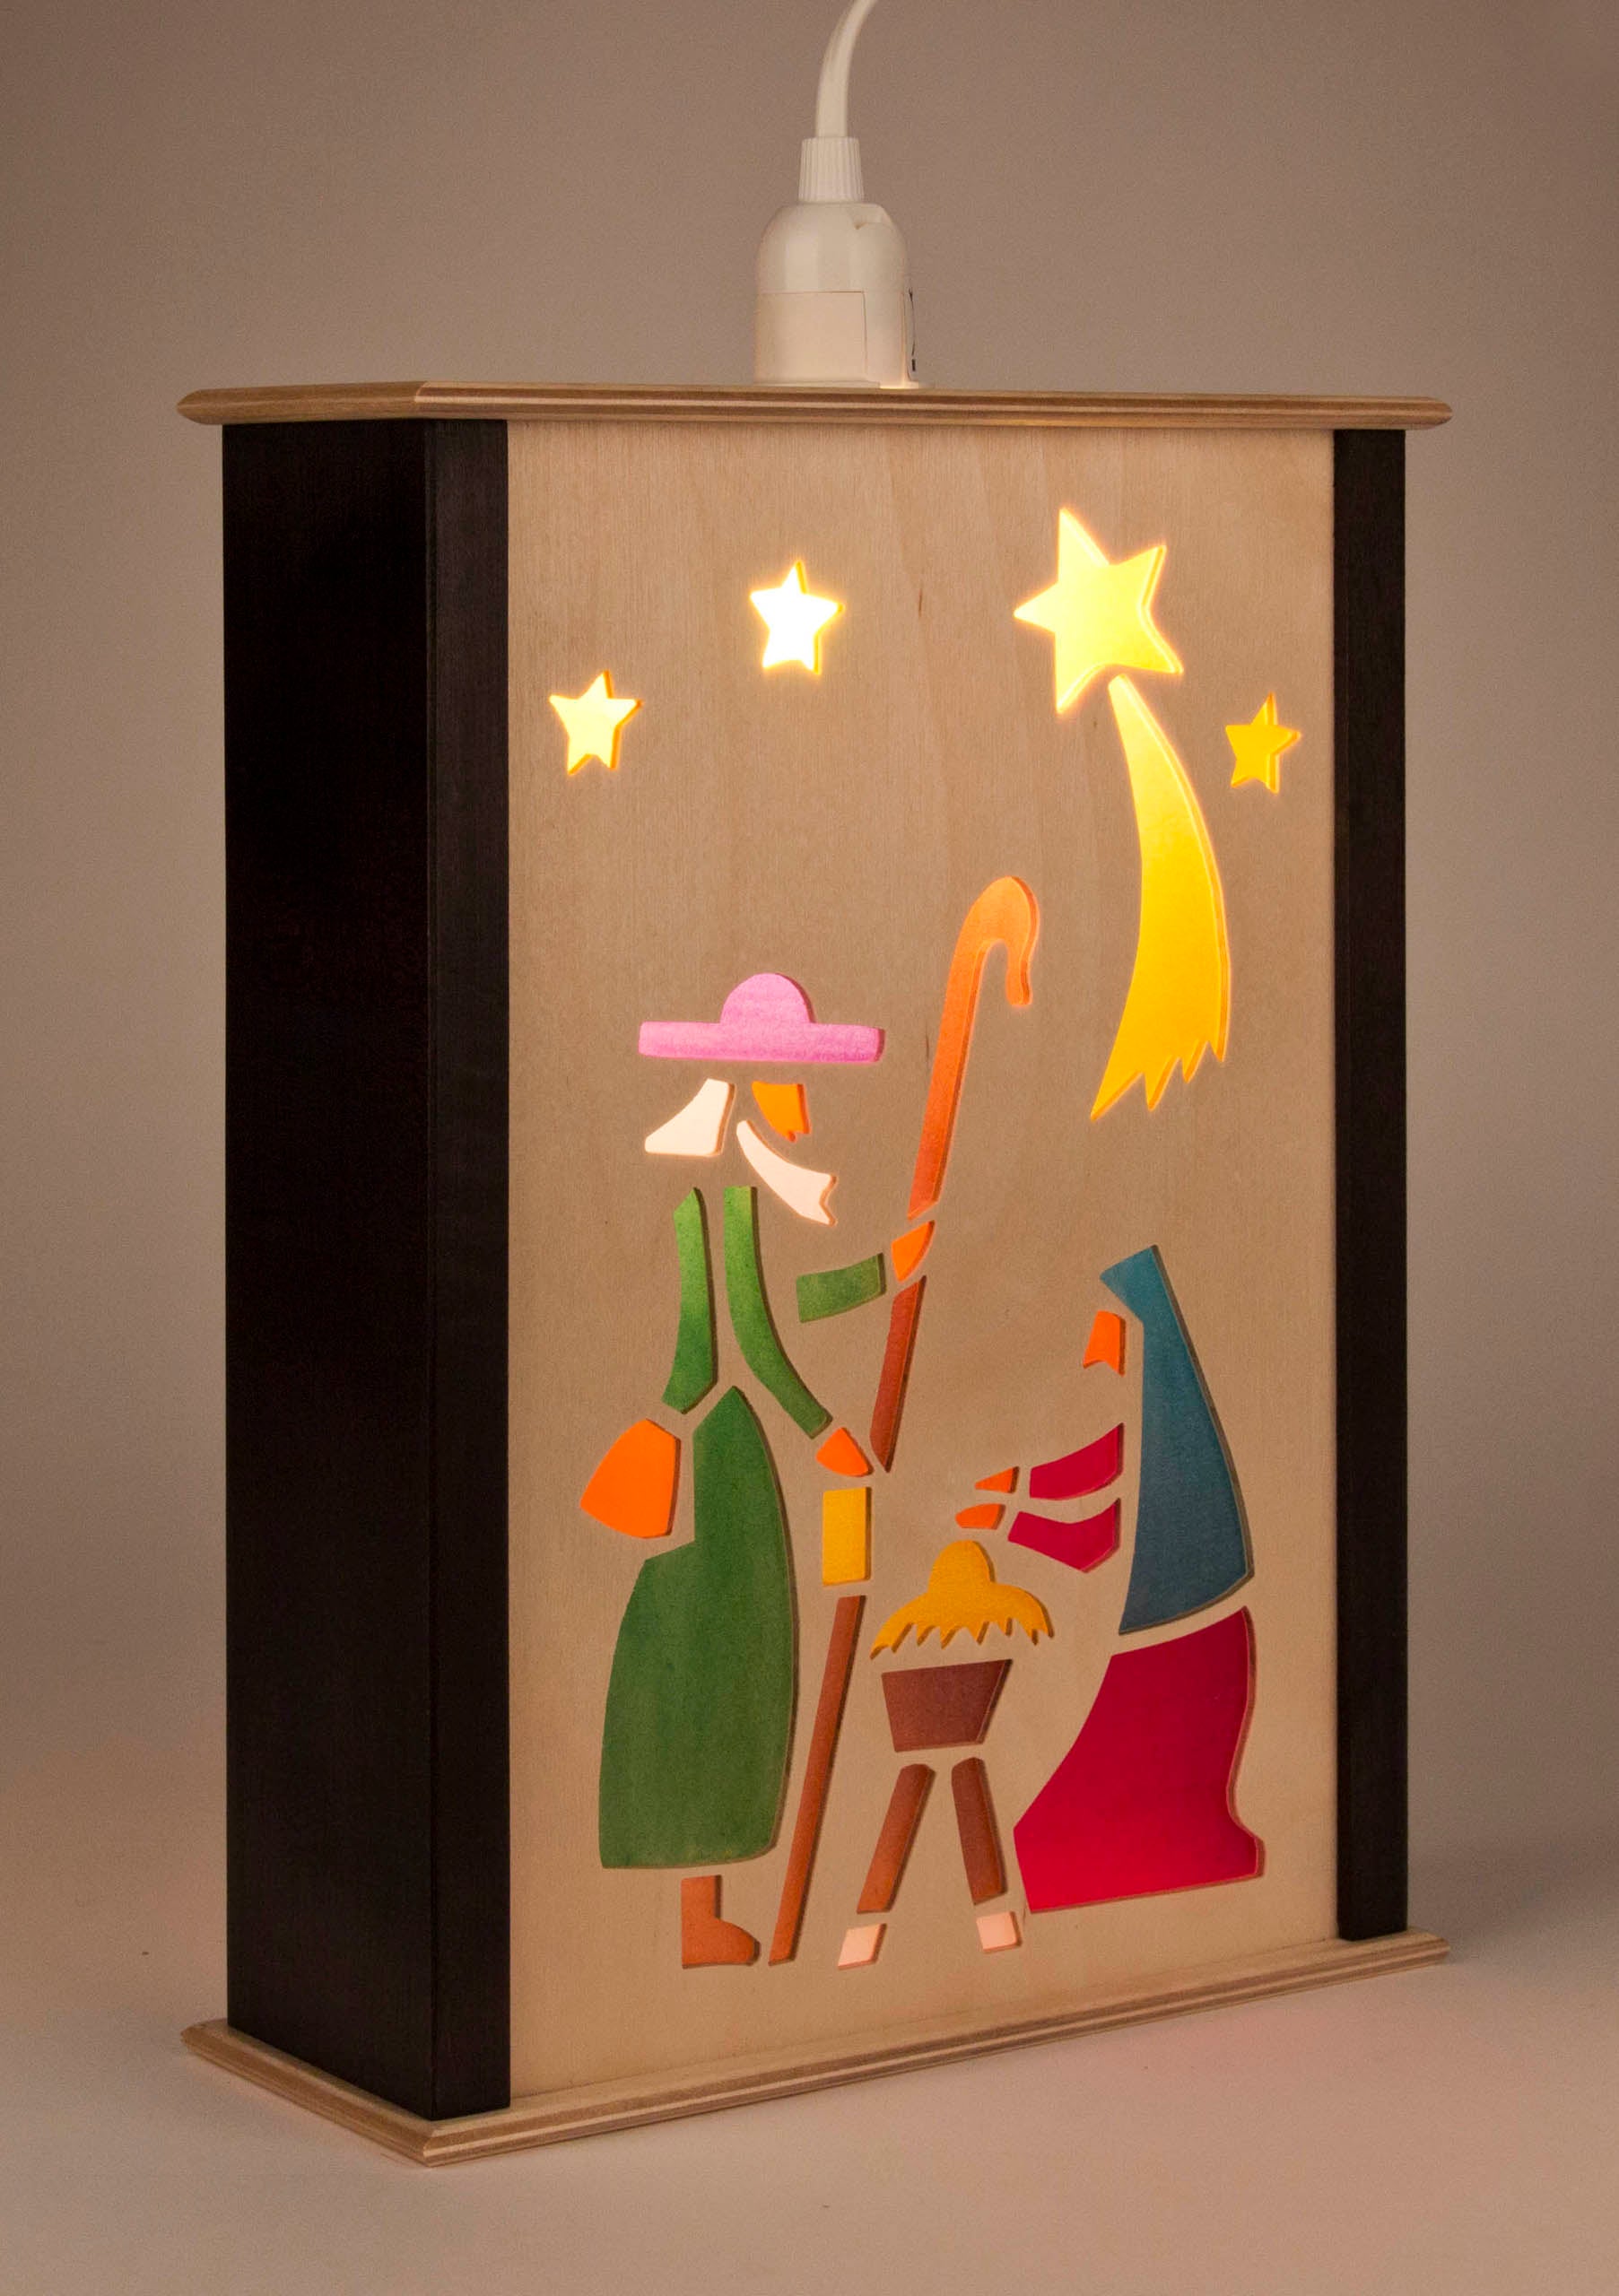 Electric Window Lantern with Nativity by Thomas Morgenstern